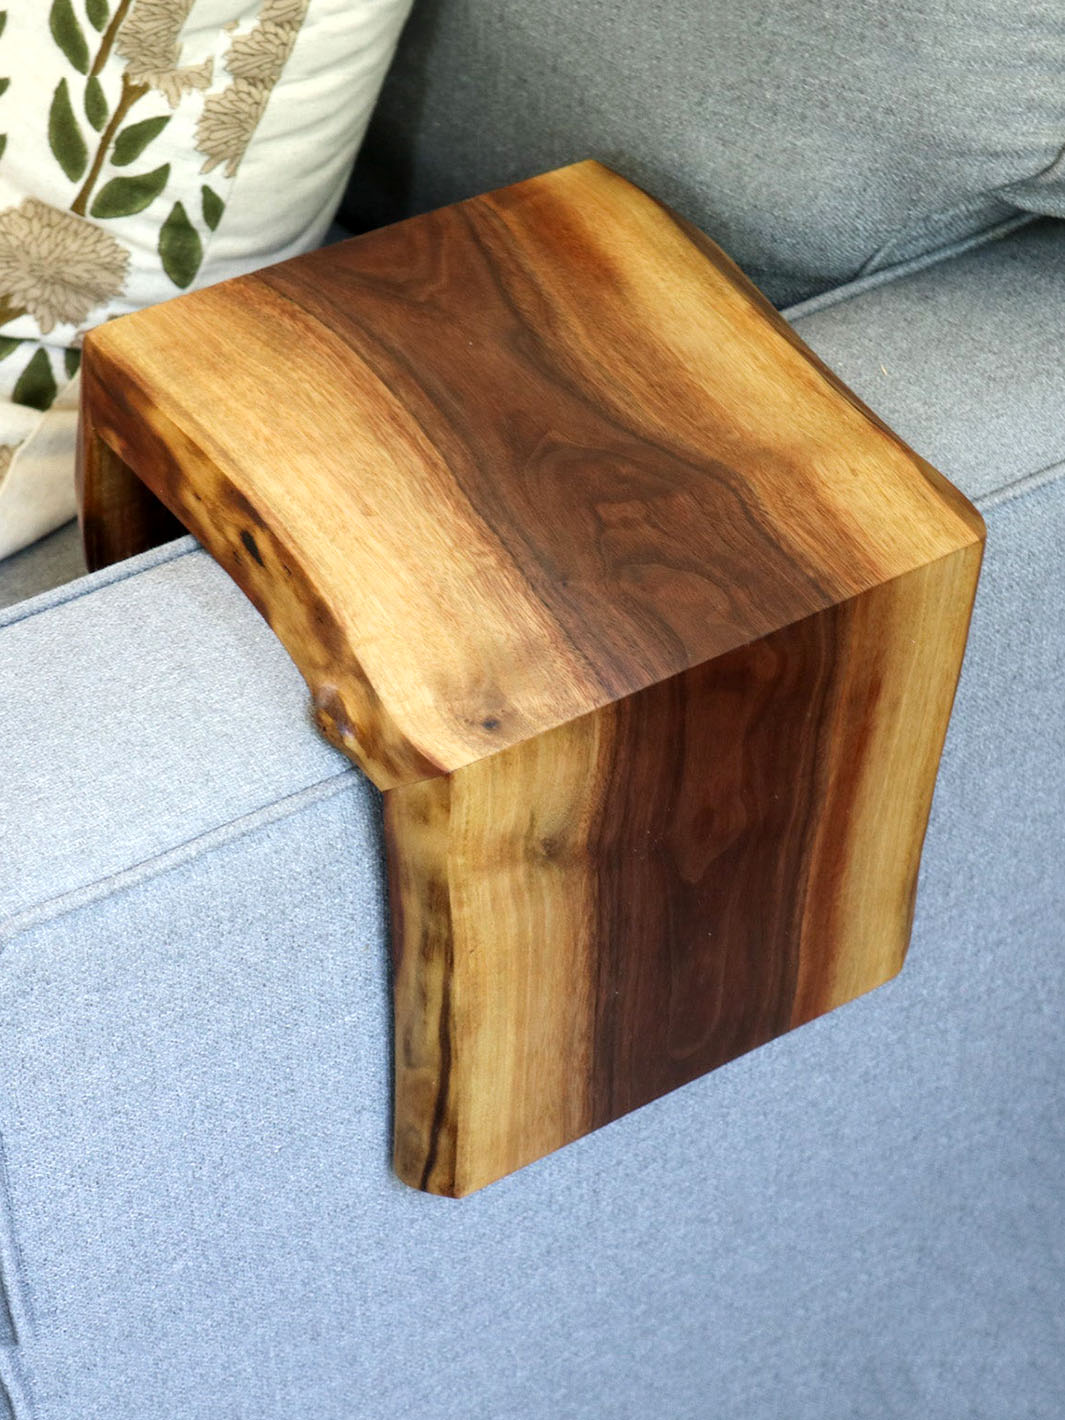 Pair of Live Edge 8" Walnut Wood Armrest Tables (in stock) Earthly Comfort Coffee Tables 2235-6